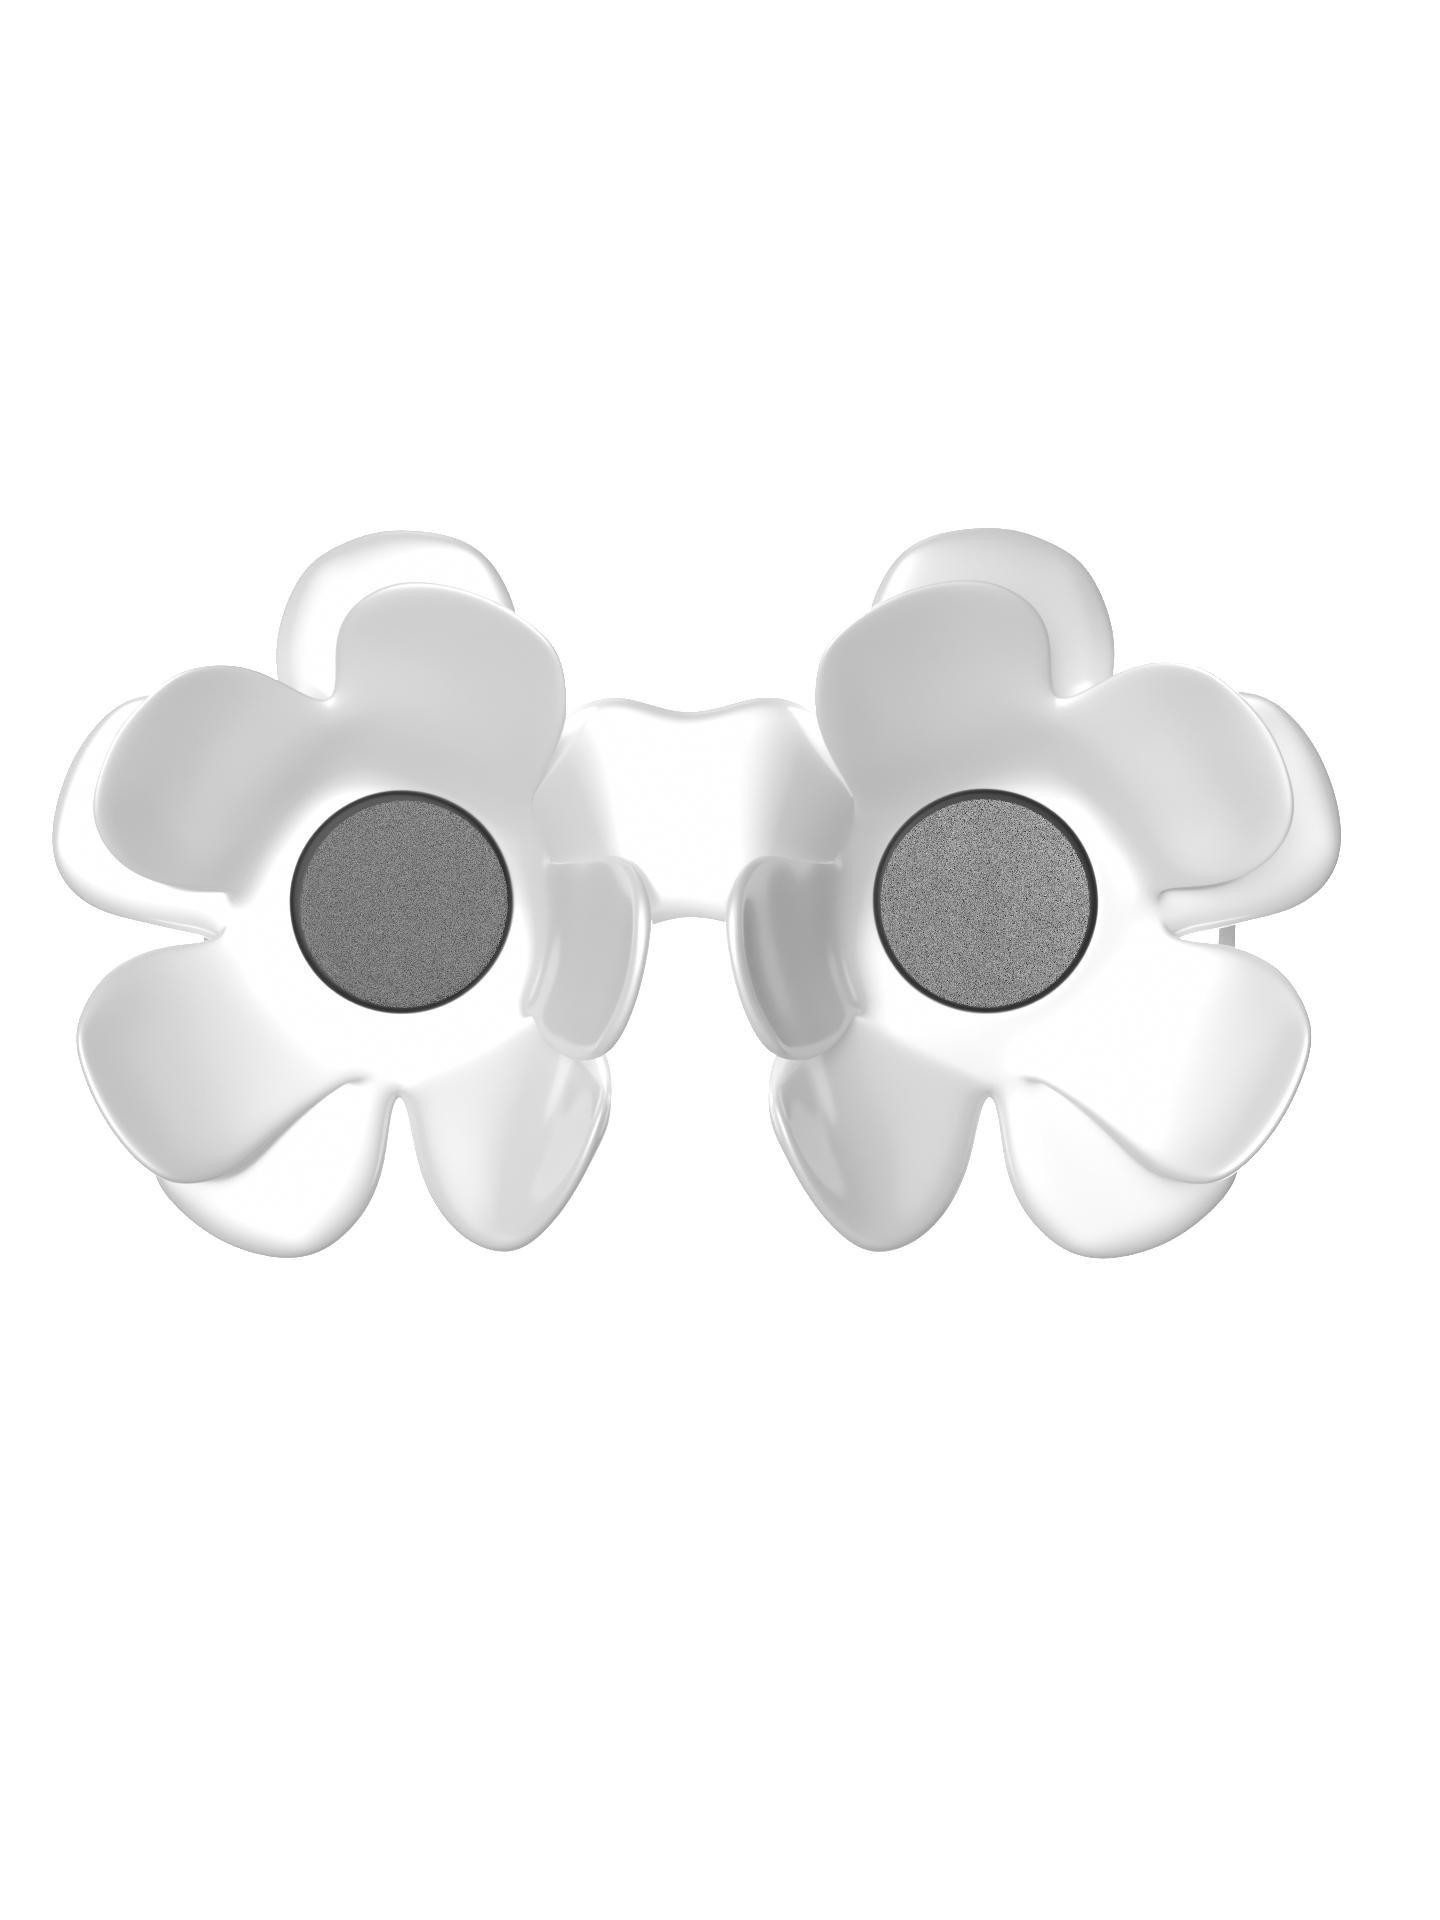 3D Printed White Flower Glasses by SUSAN FANG